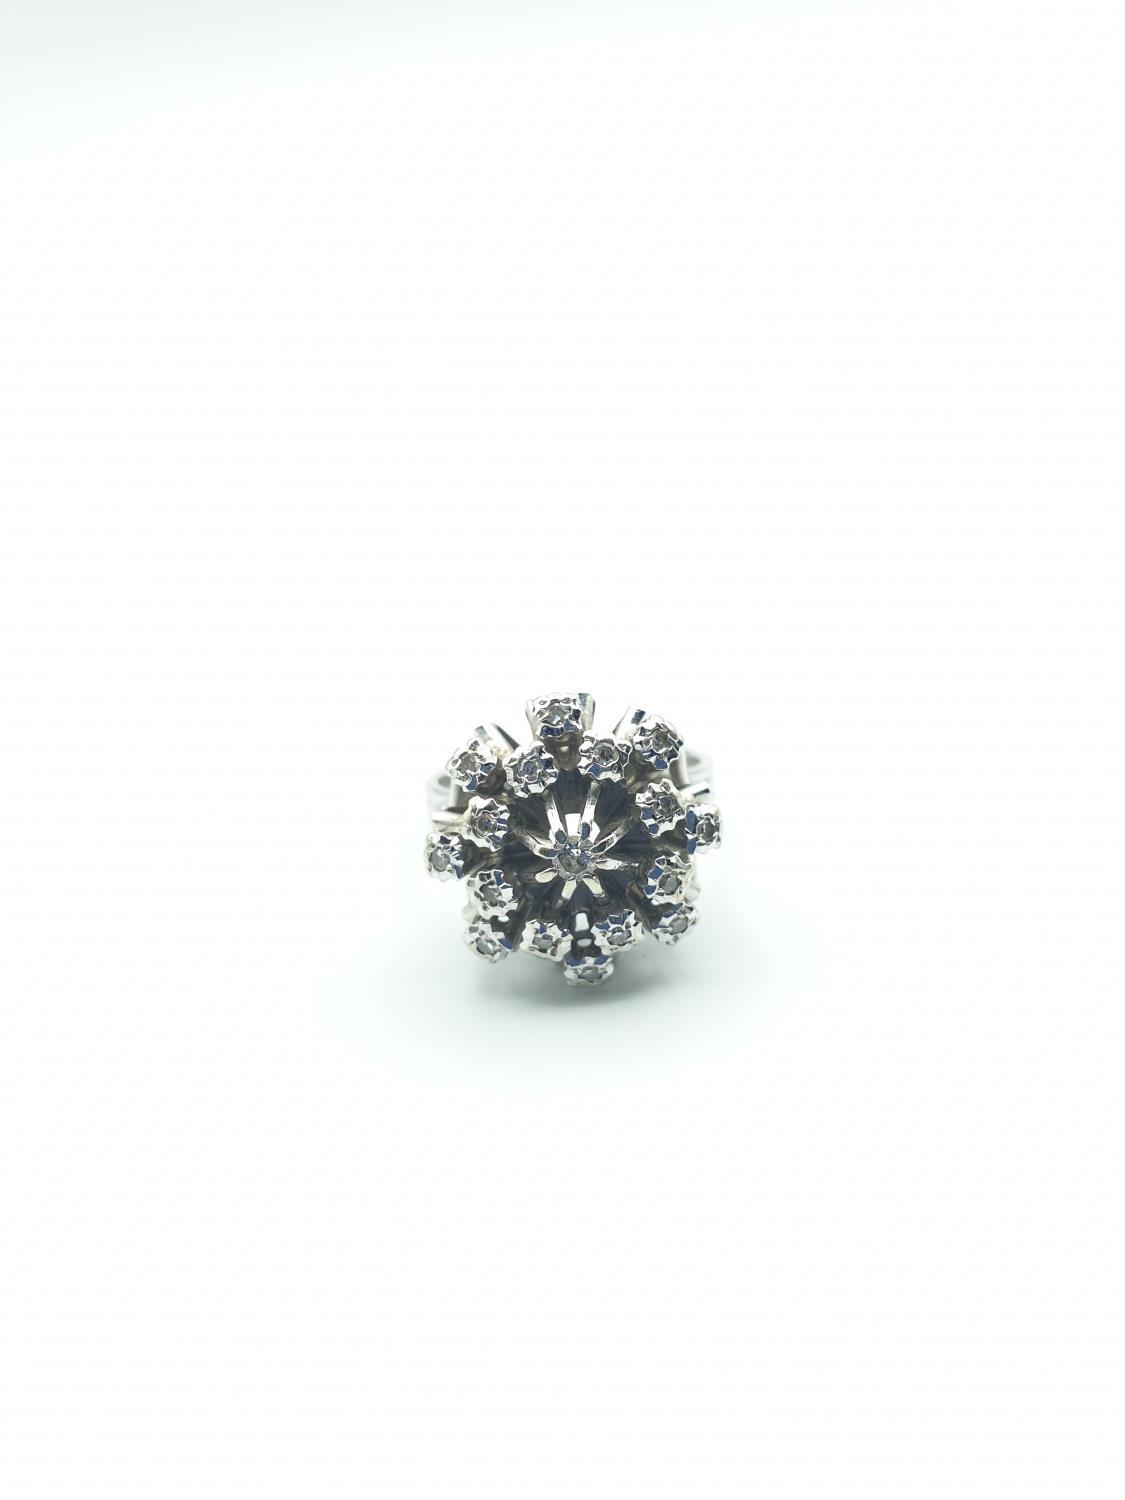 18CT WHITE GOLD DIAMOND CLUSTER RING, SIZE M WEIGHT 6.2G. Hallmark inside the band showing 750 for - Image 3 of 6